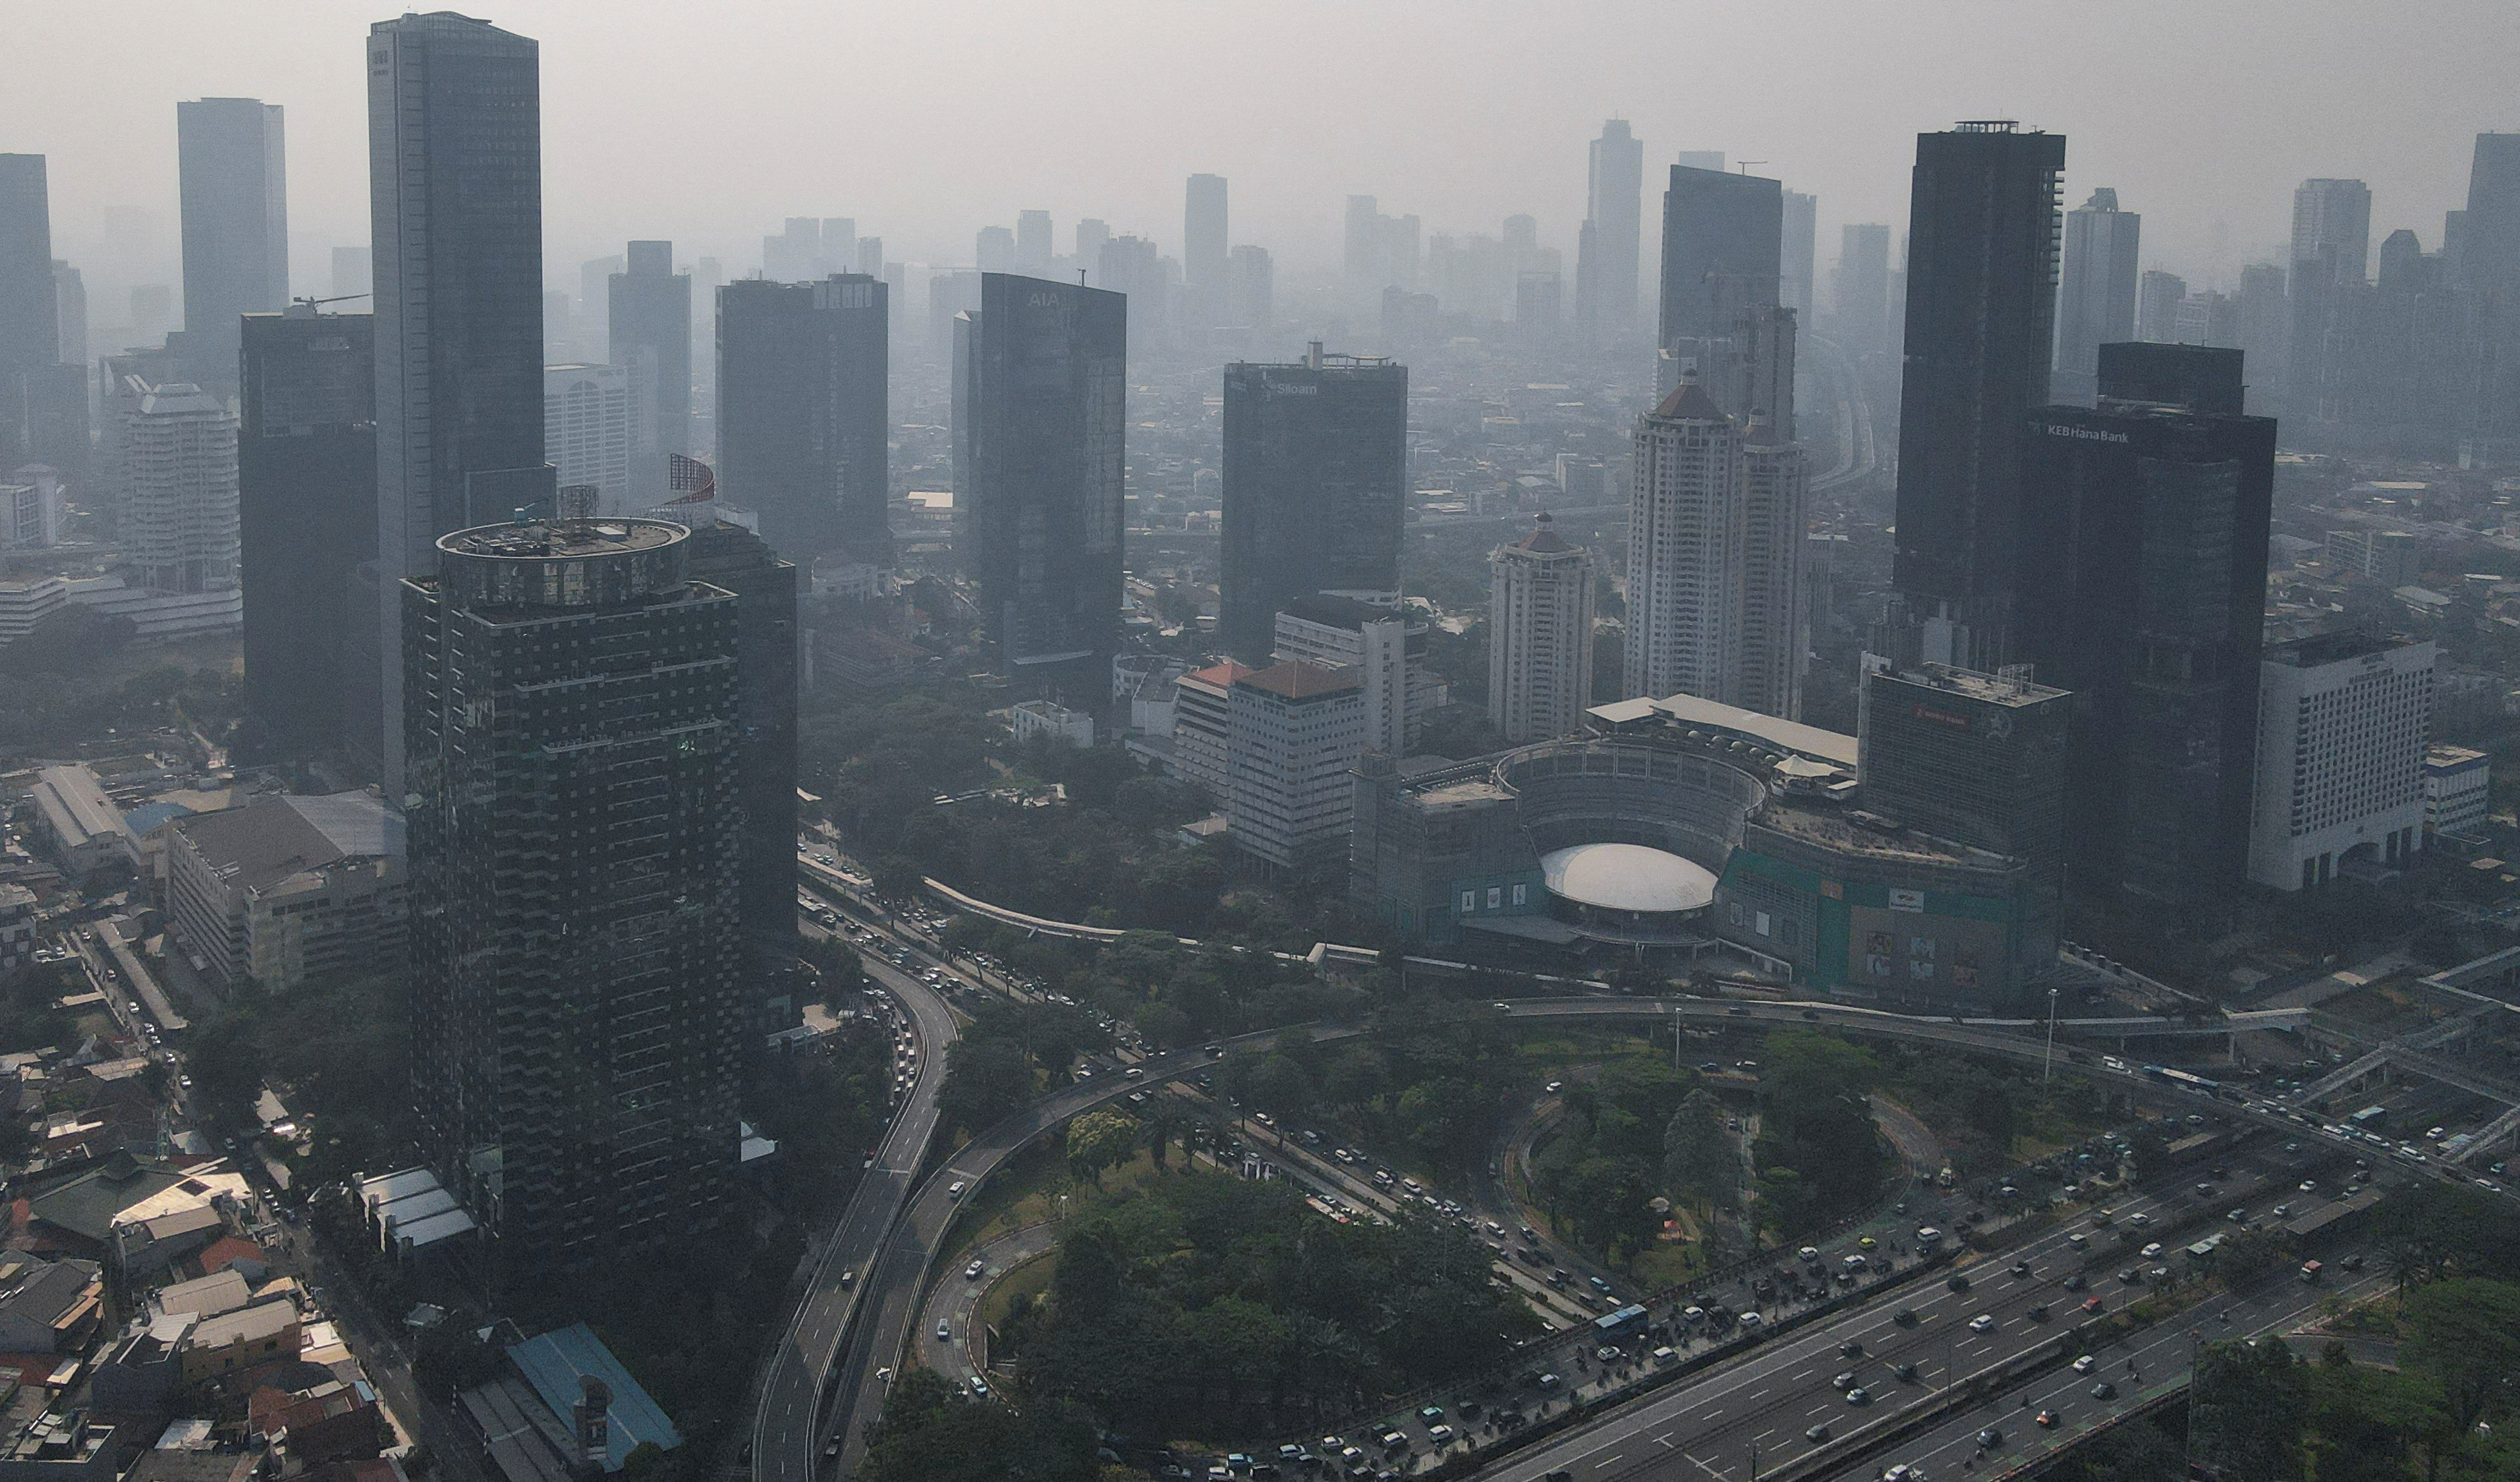 General view of high-rise buildings shrouded in smog in Jakarta